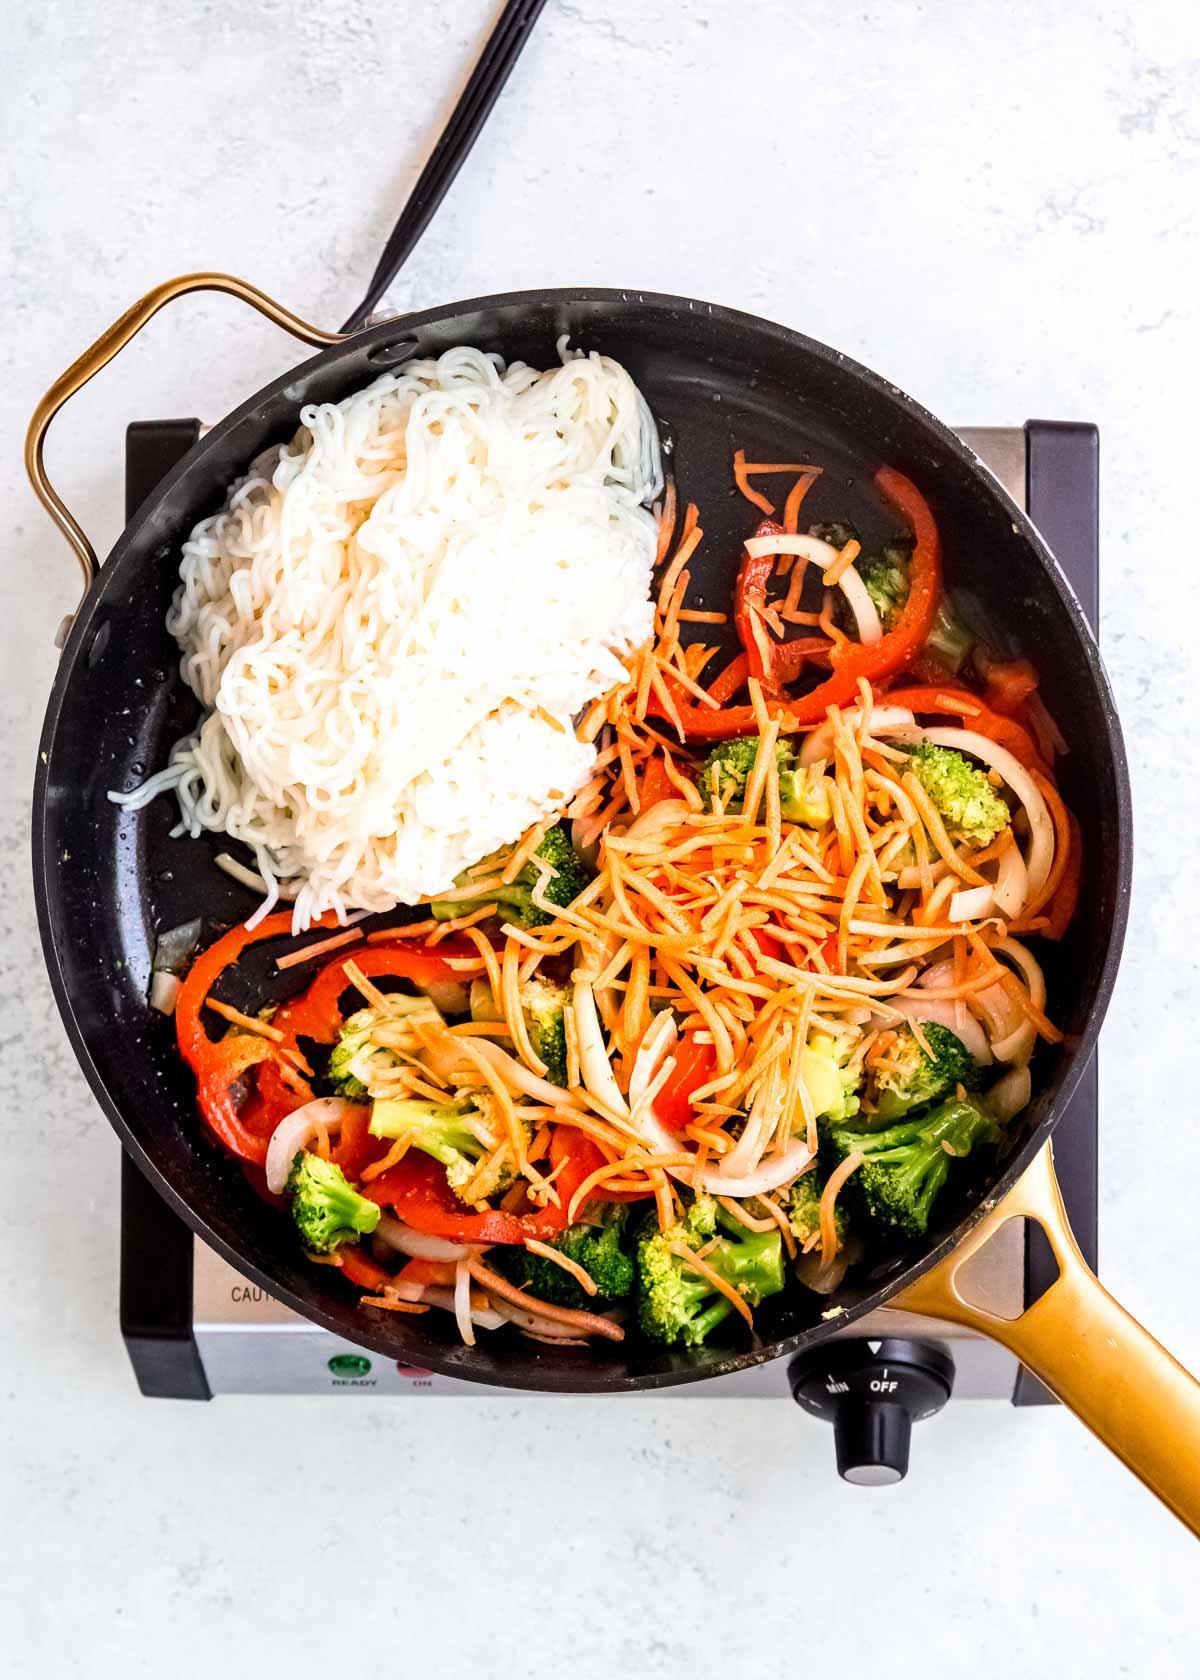 shirataki noodles and shredded carrots in a skillet with sauteed red peppers, onions, and broccoli